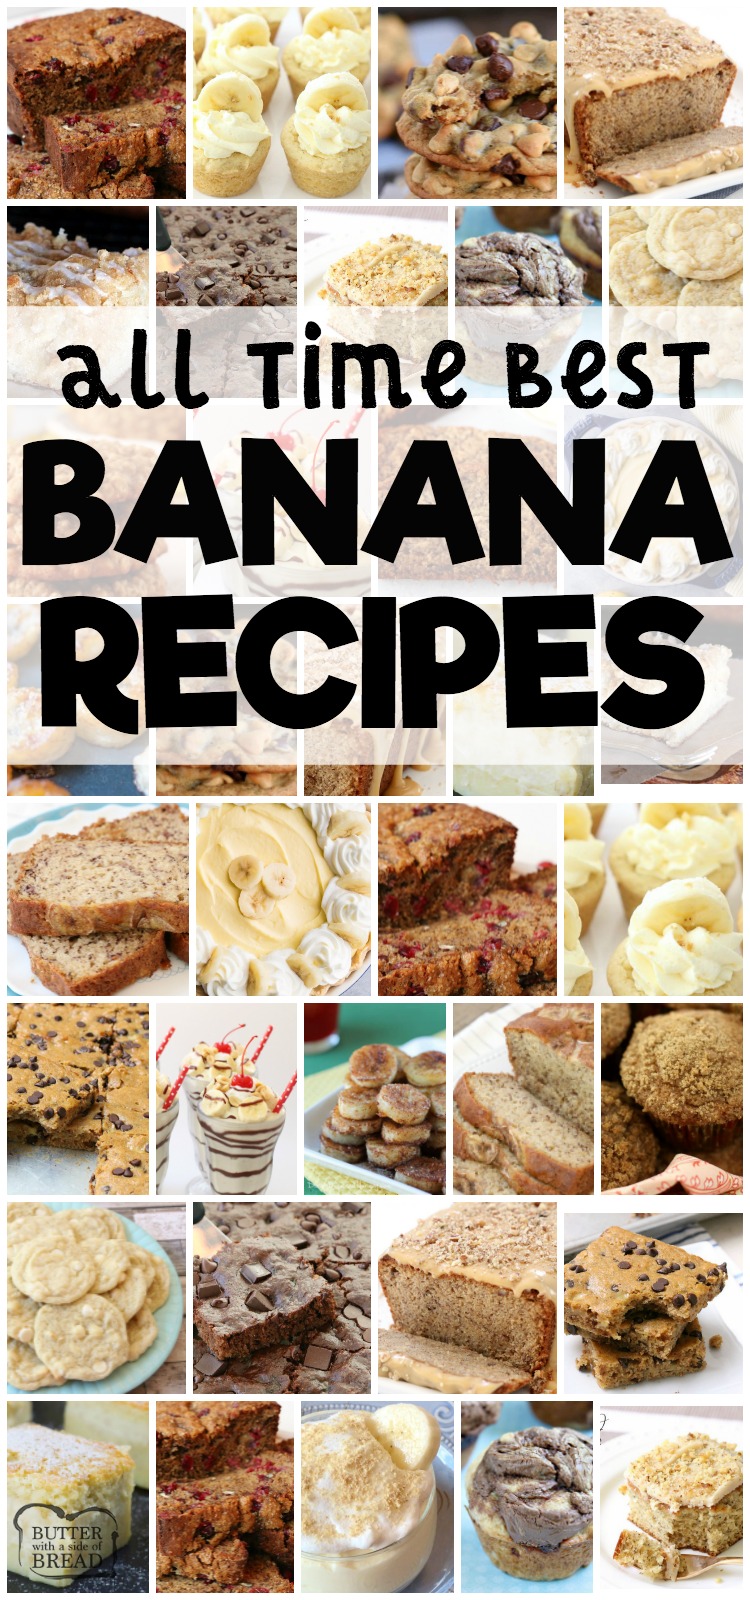 Best banana recipes for using those ripe bananas! Tried and true family favorite banana recipes for banana bread, banana muffins, banana pudding, bars, cookies and more. #banana $recipes #bananabread #cookies #cake #baking #desserts from BUTTER WITH A SIDE OF BREAD